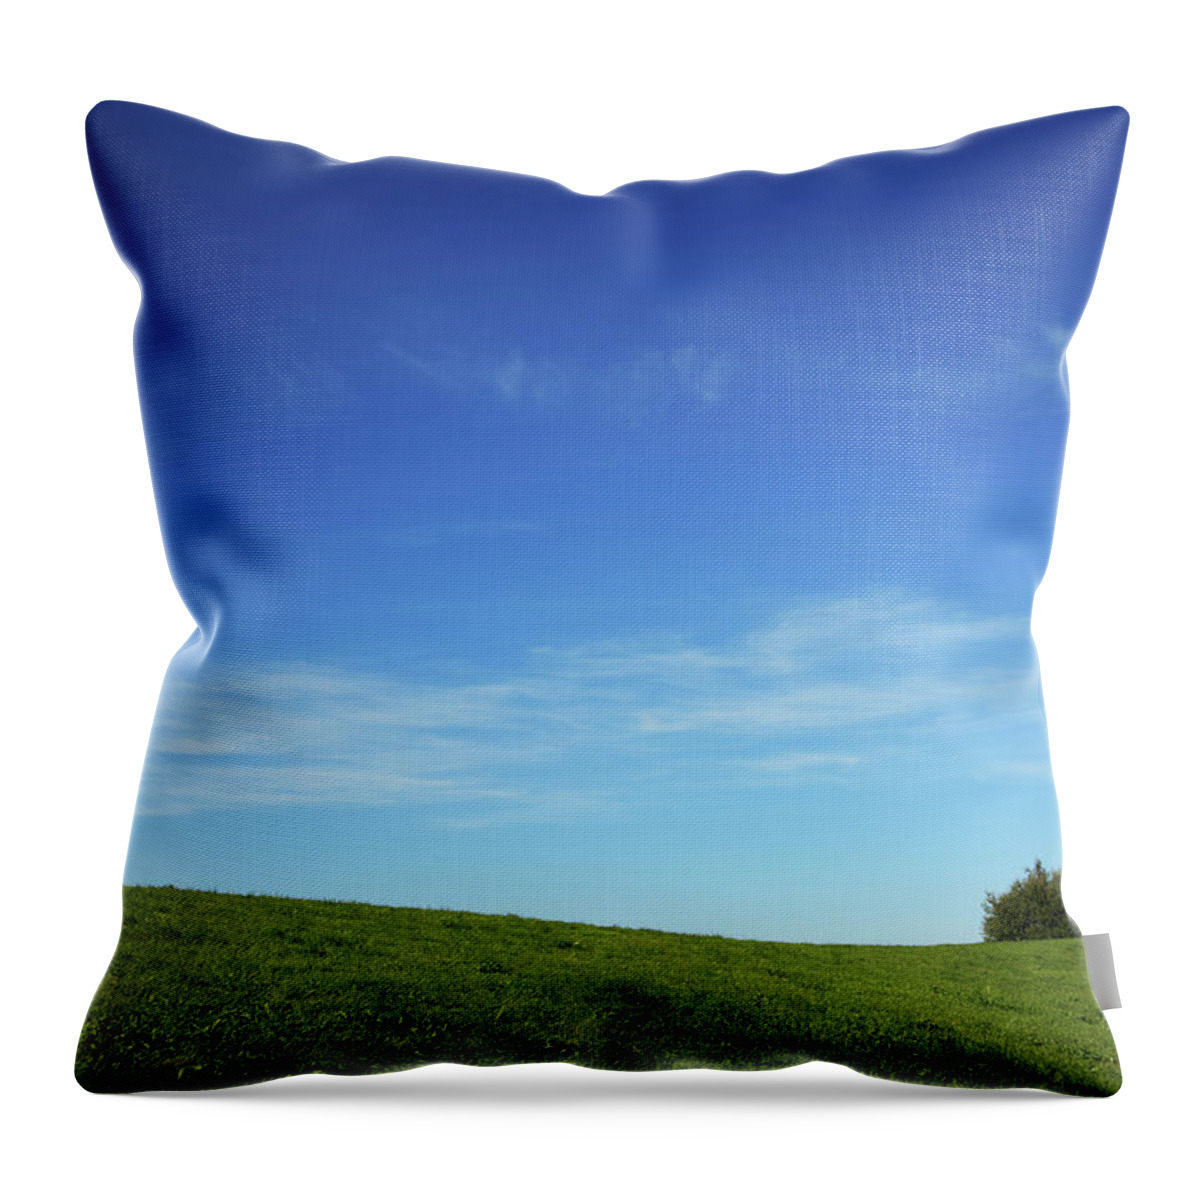 Scenics Throw Pillow featuring the photograph Rural Landscape, Bavaria, Germany by Hiroshi Higuchi